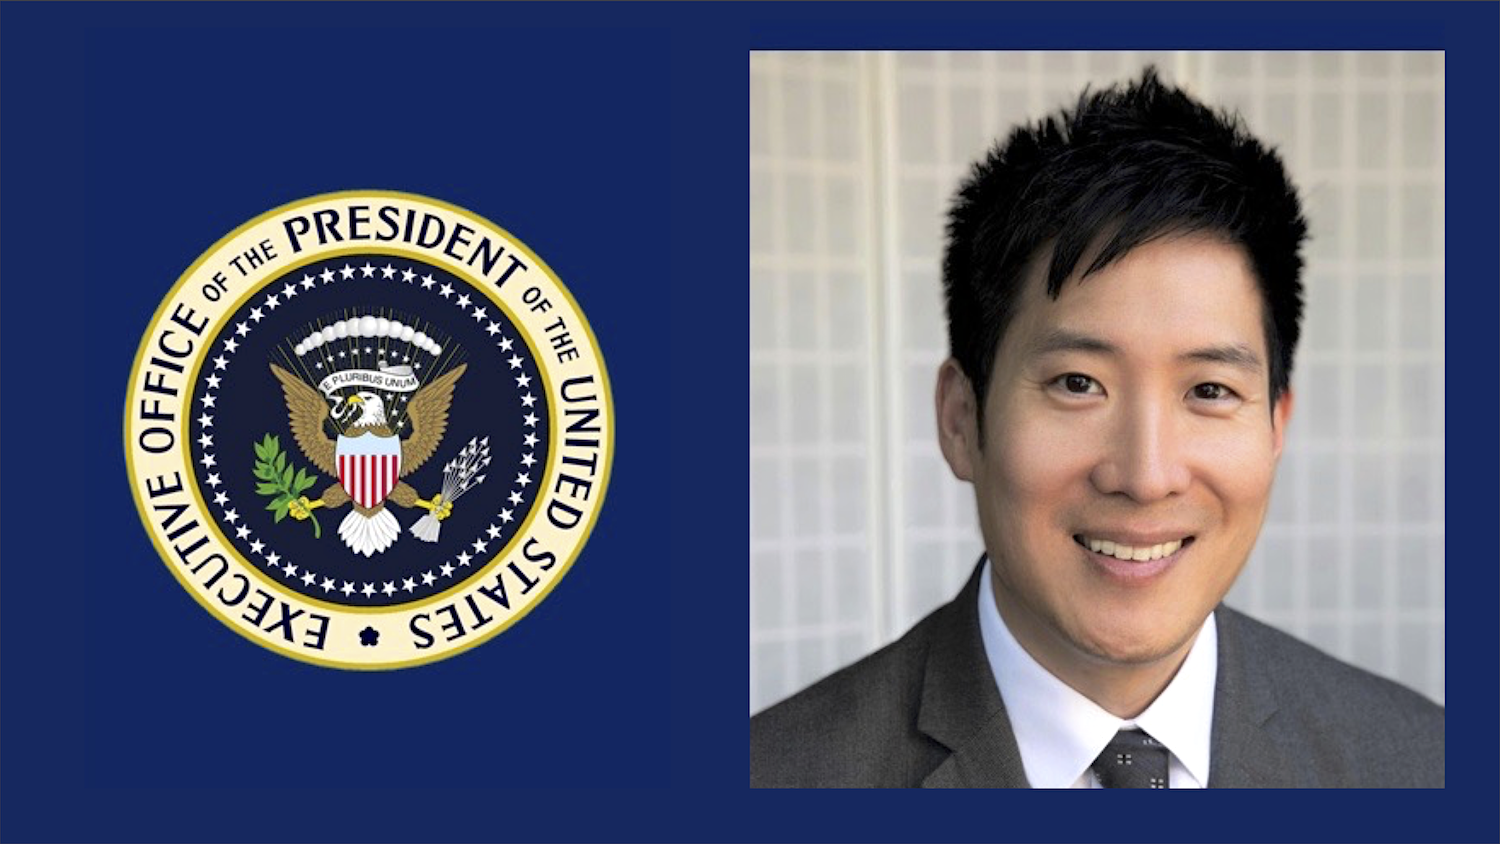 white house seal and photo of man